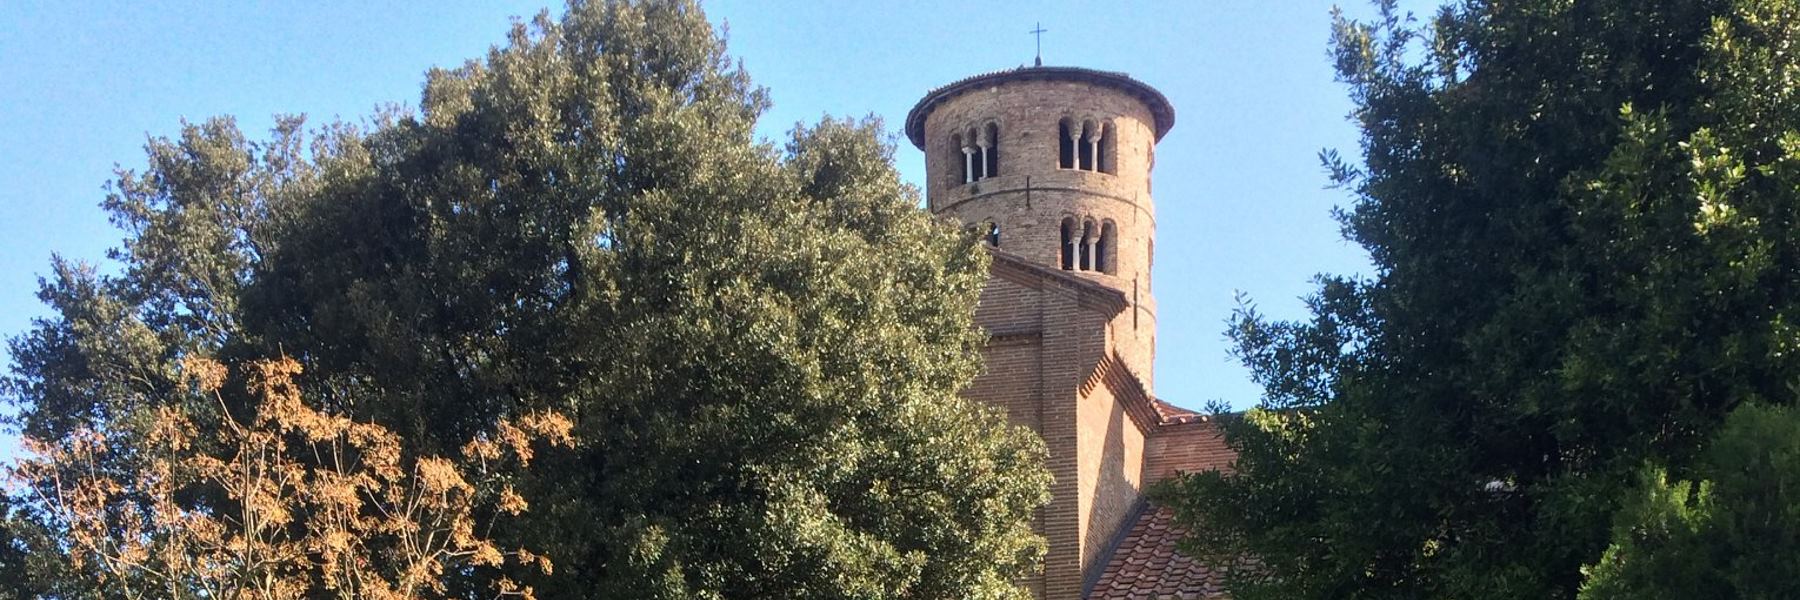 From Cervia to Sant'Apolinare in Classe Cathedral in Ravenna by bike